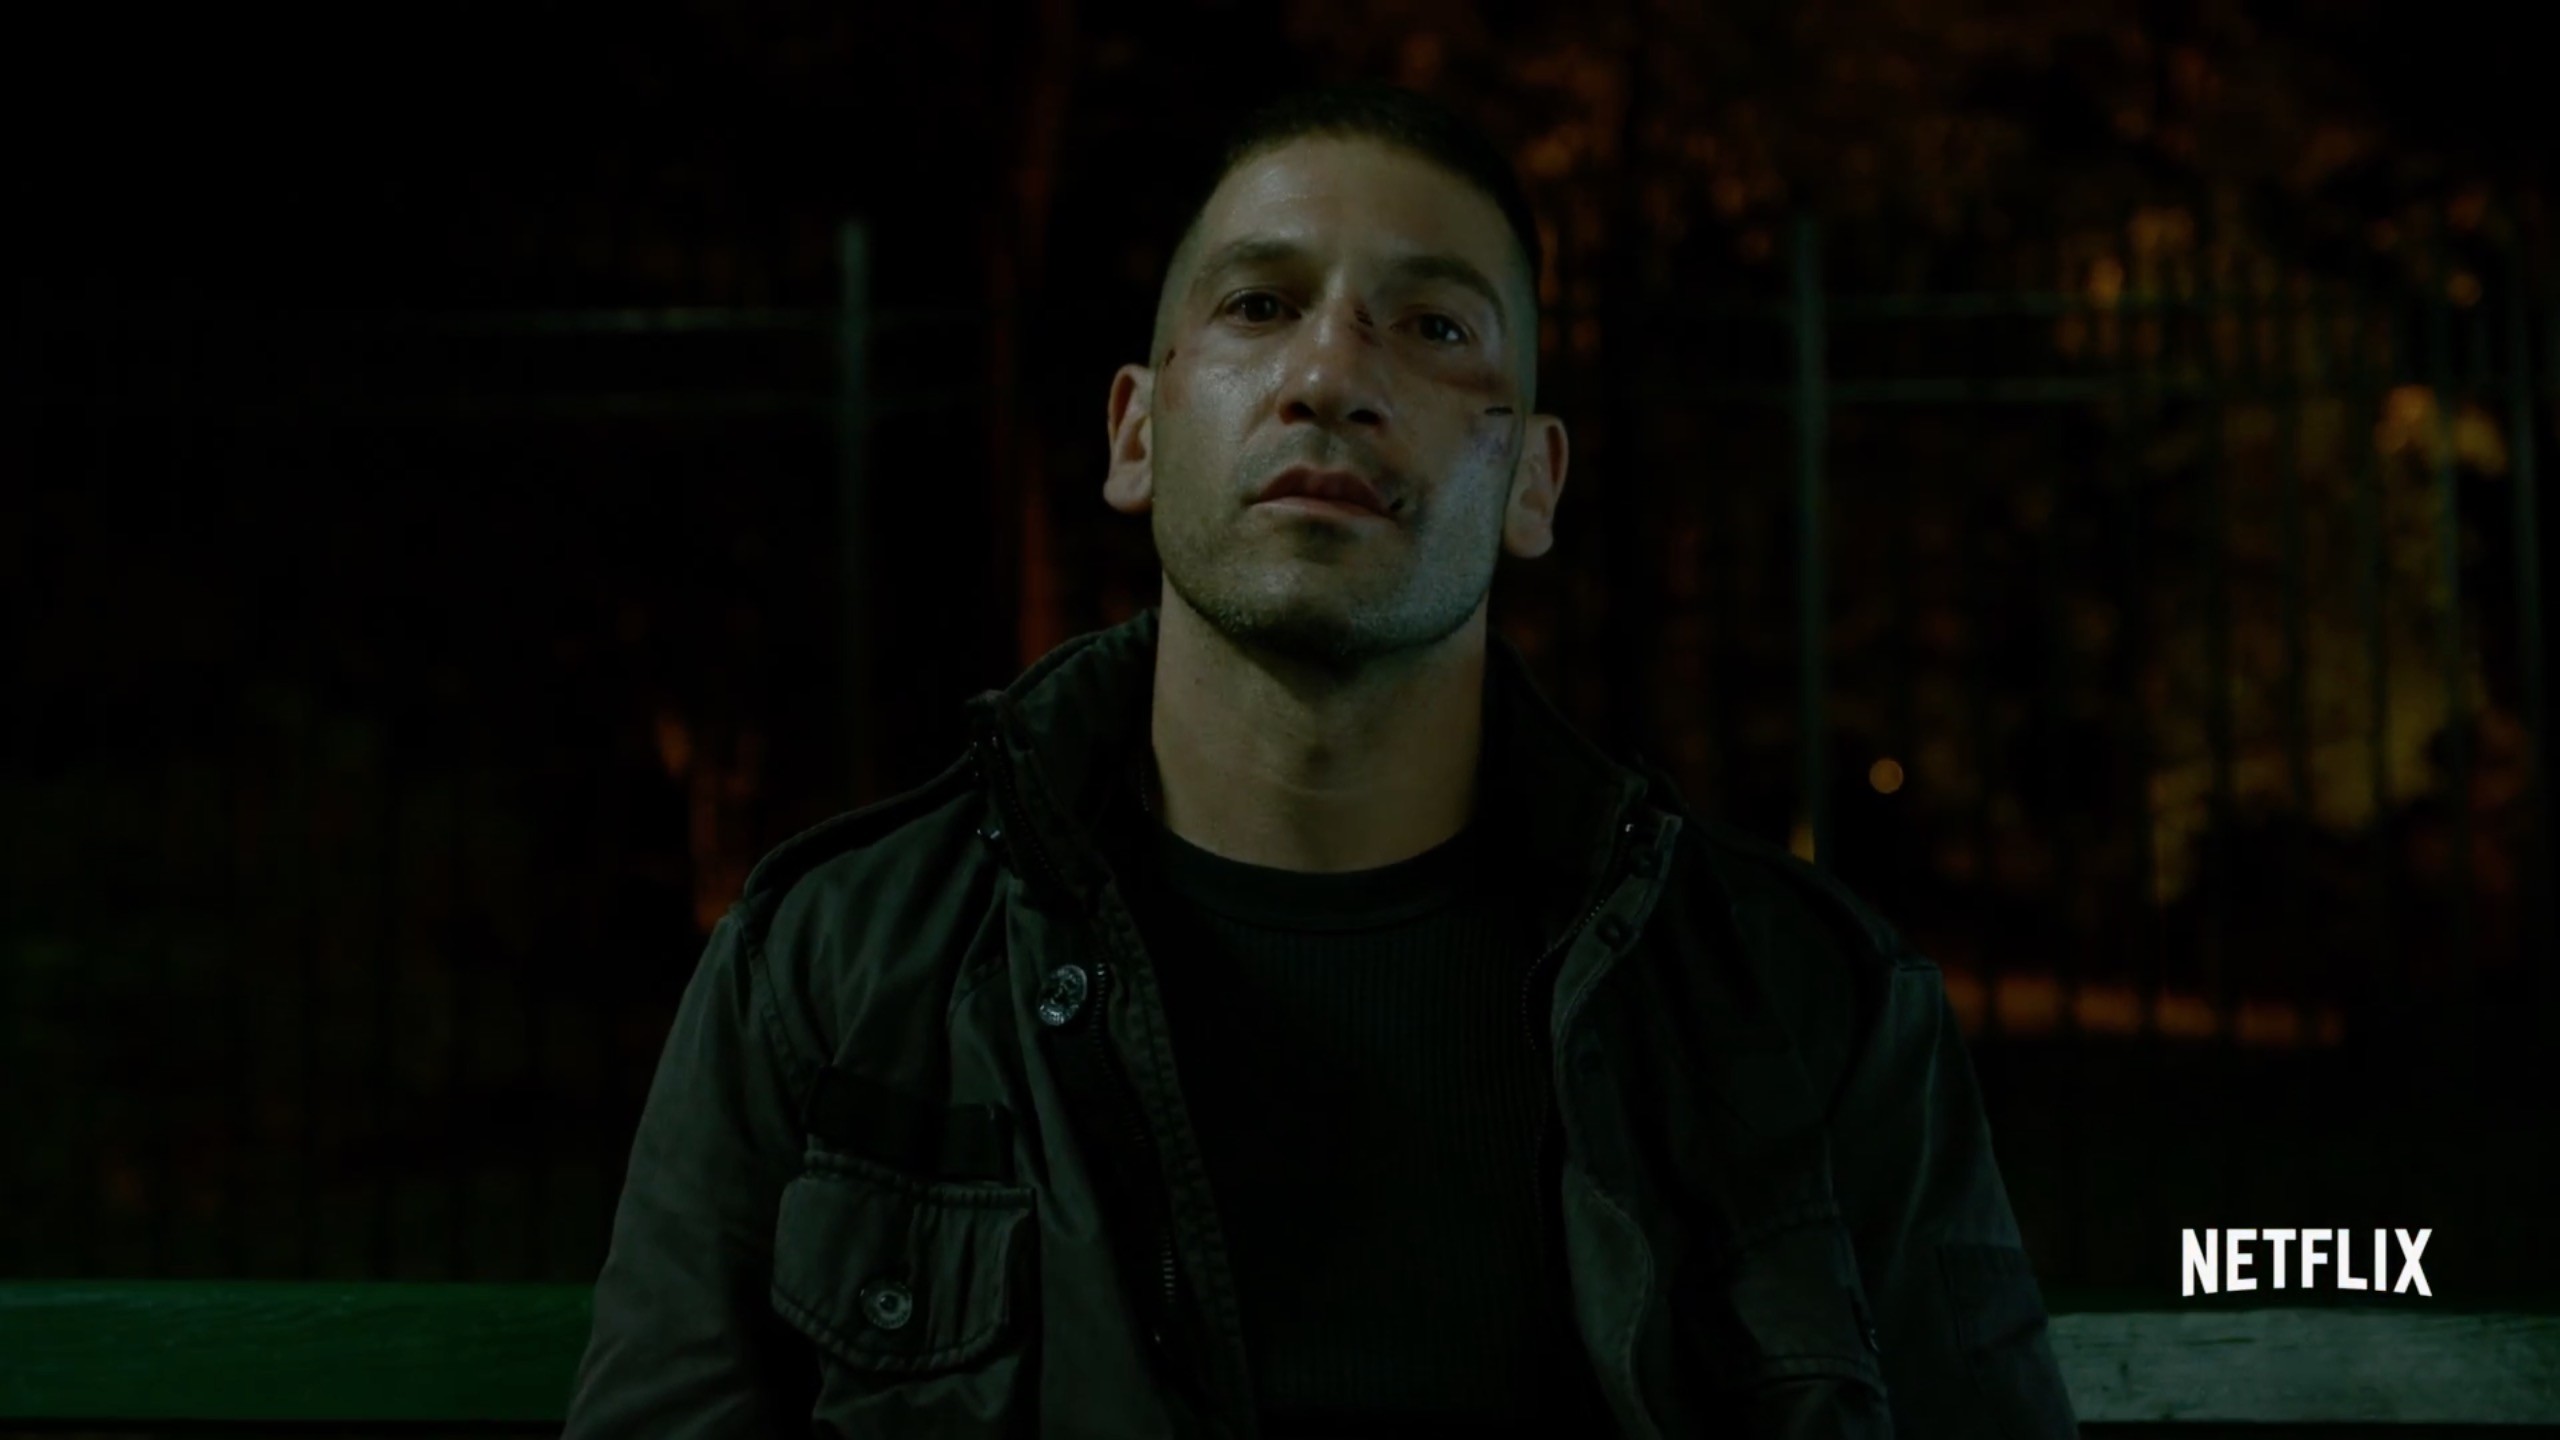 2560x1440 Daredevil season 2 trailer introduces the Punisher